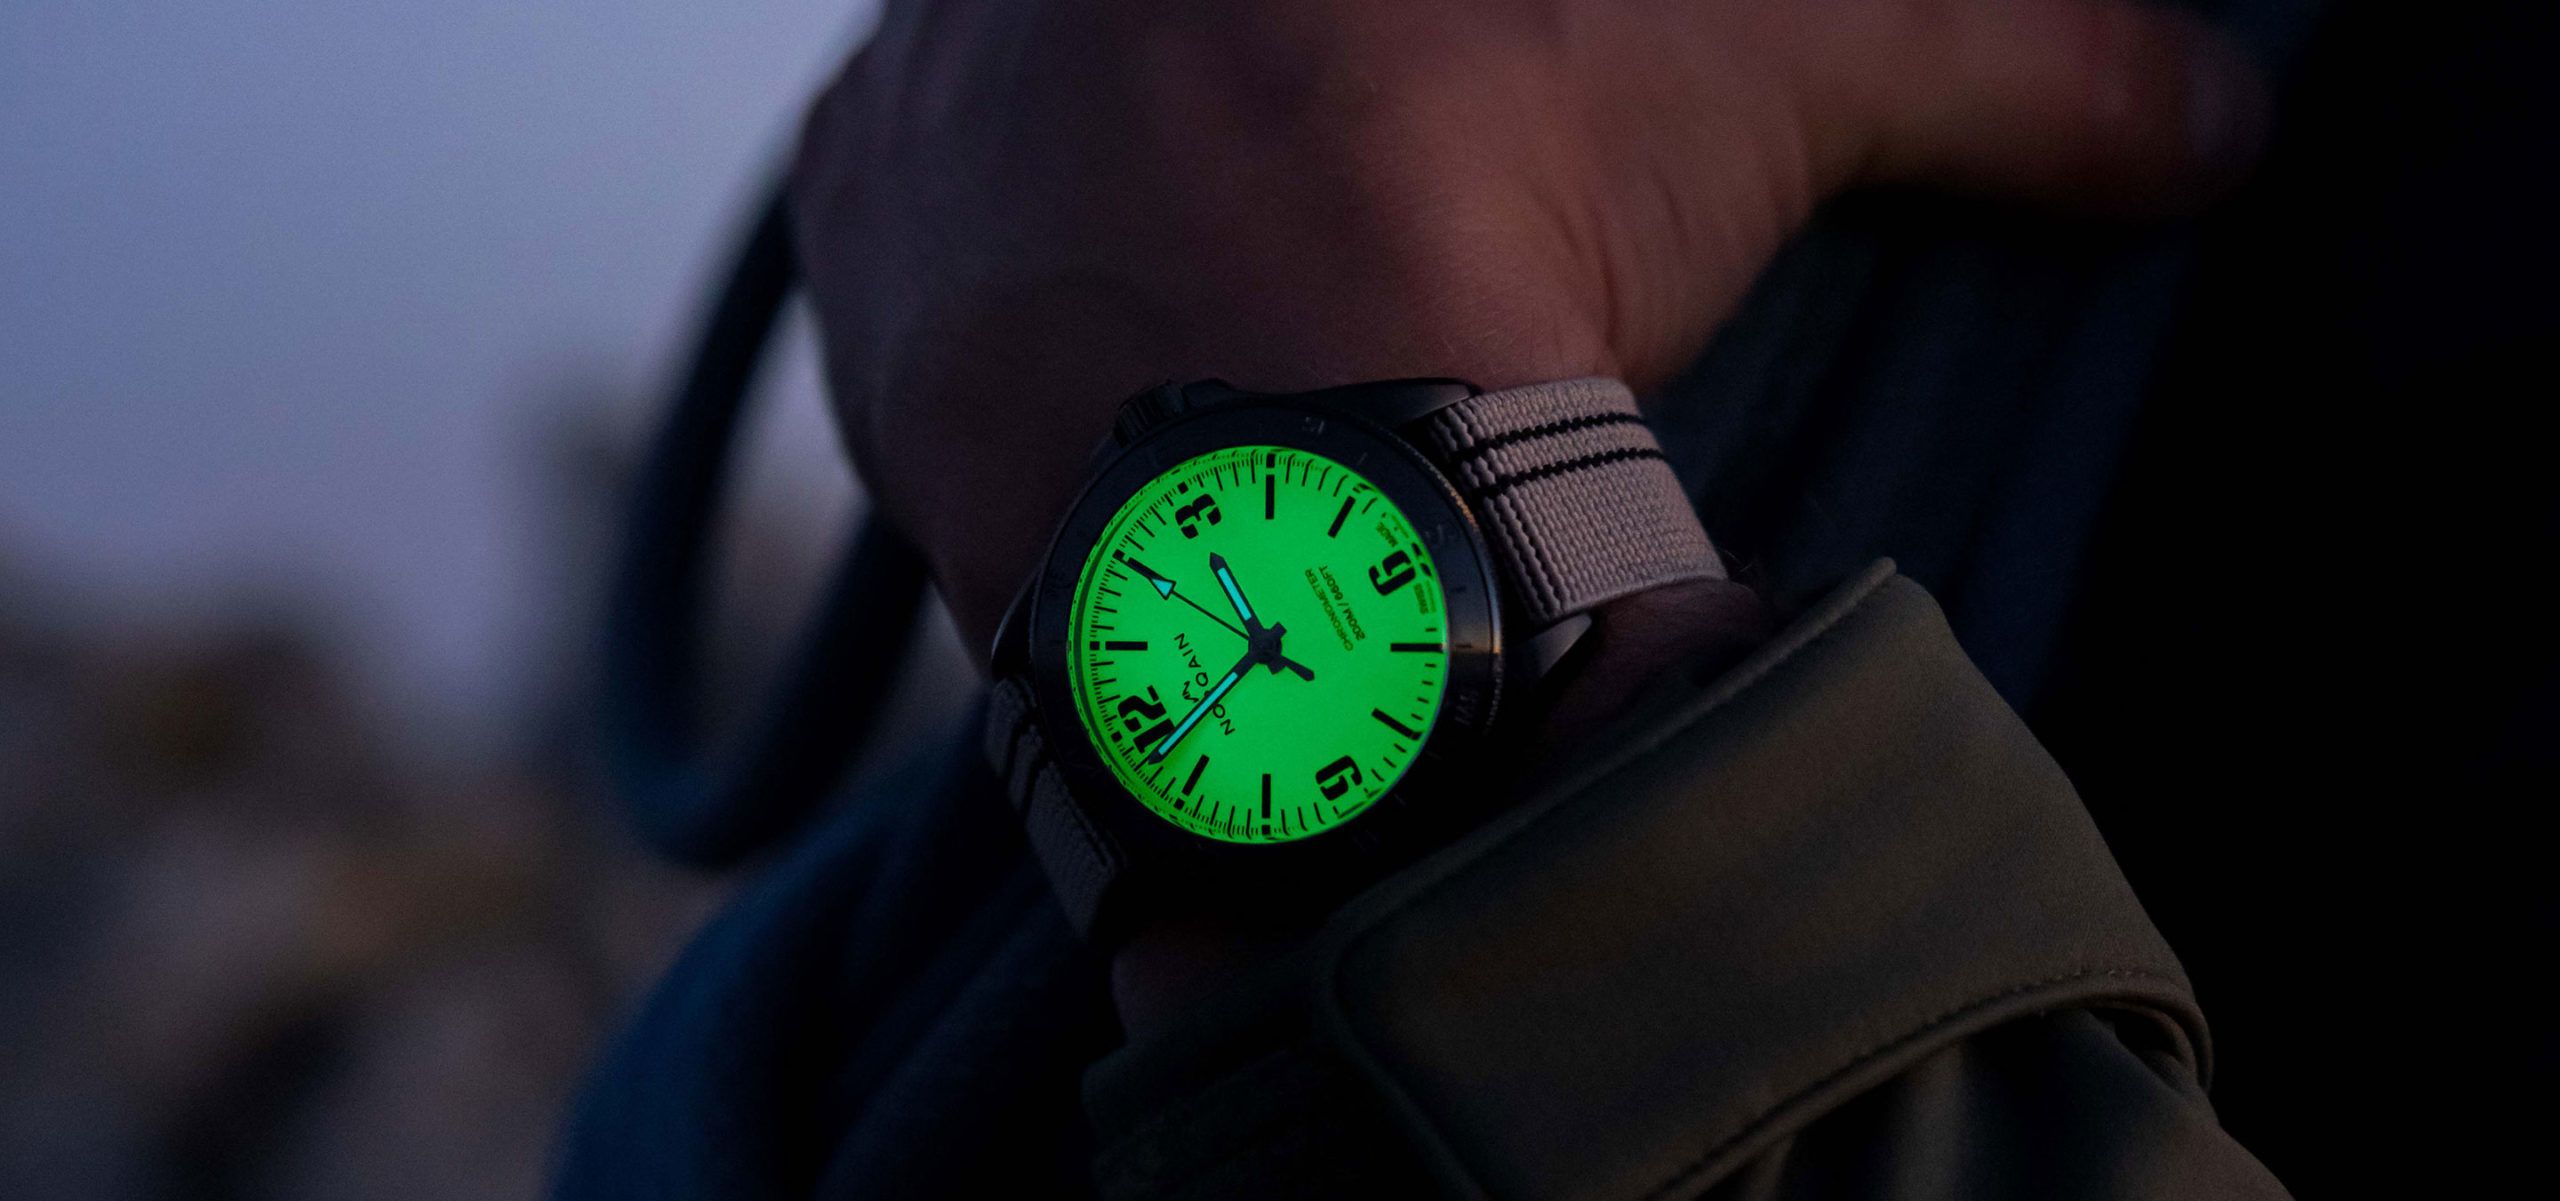 Let The ‘Lume’ Lead The Way: Norqain’s Neverest Night Sight Reaches New Heights